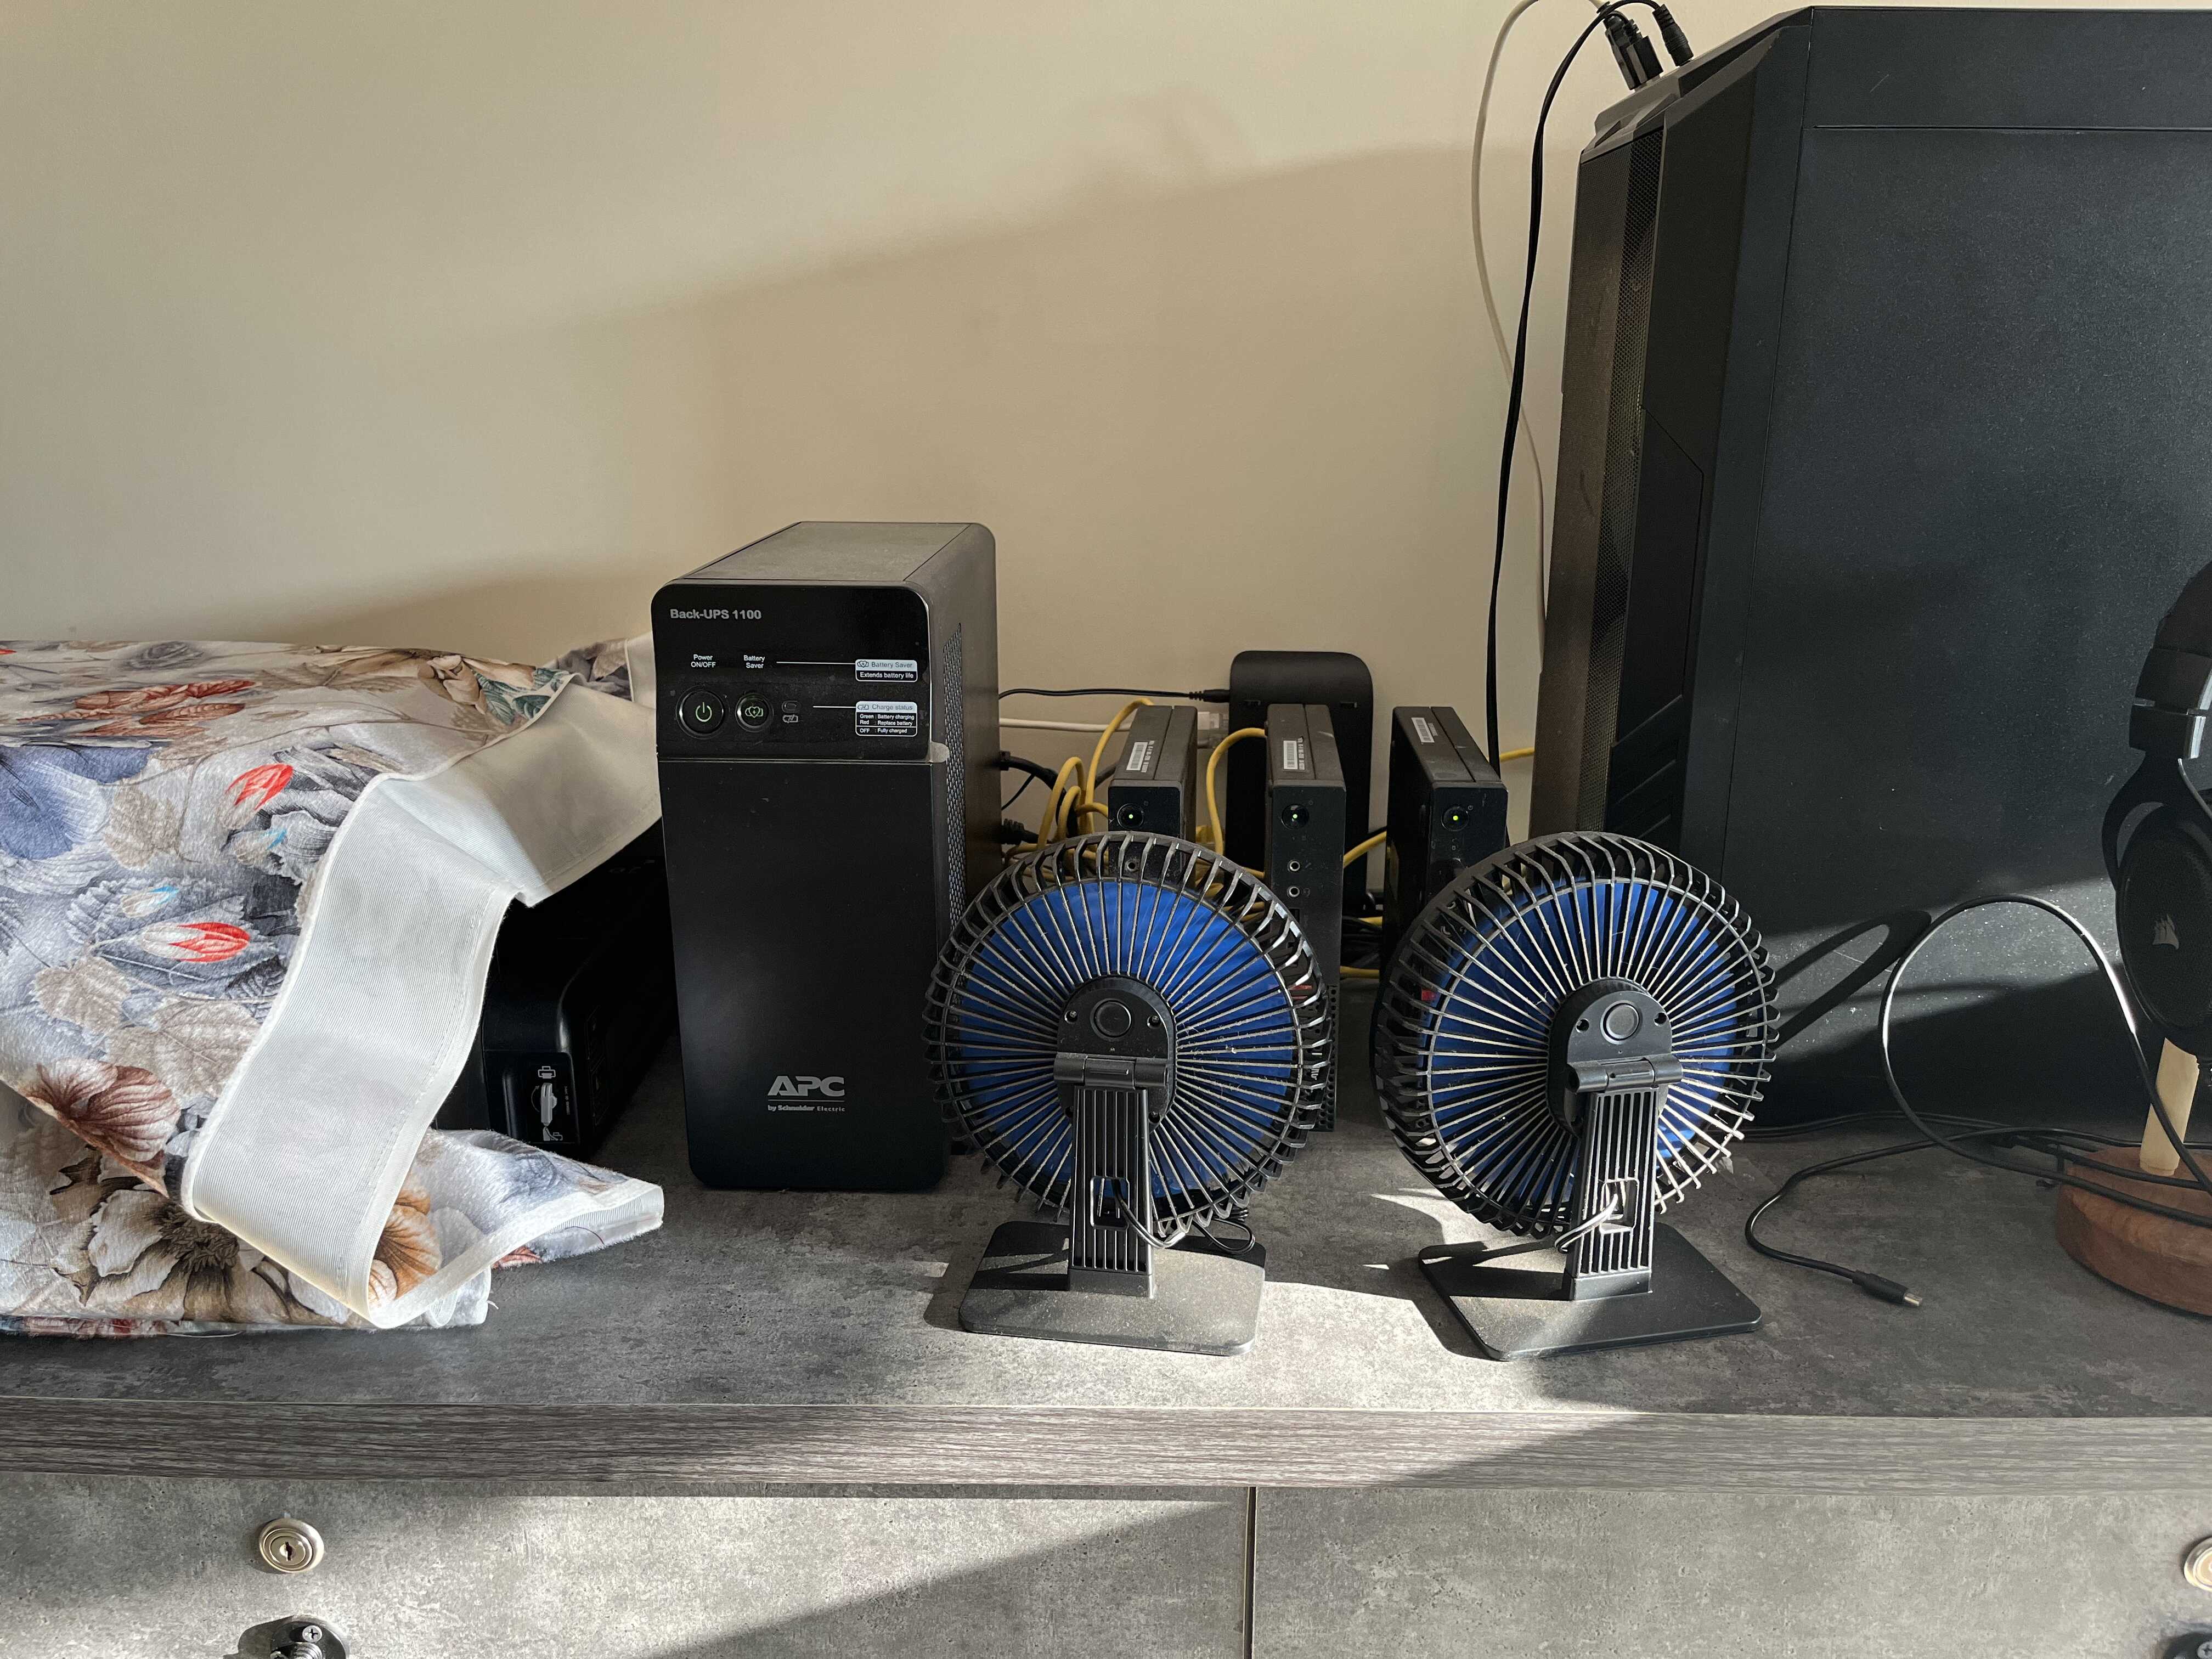 3 ThinkCenters with fan cooling